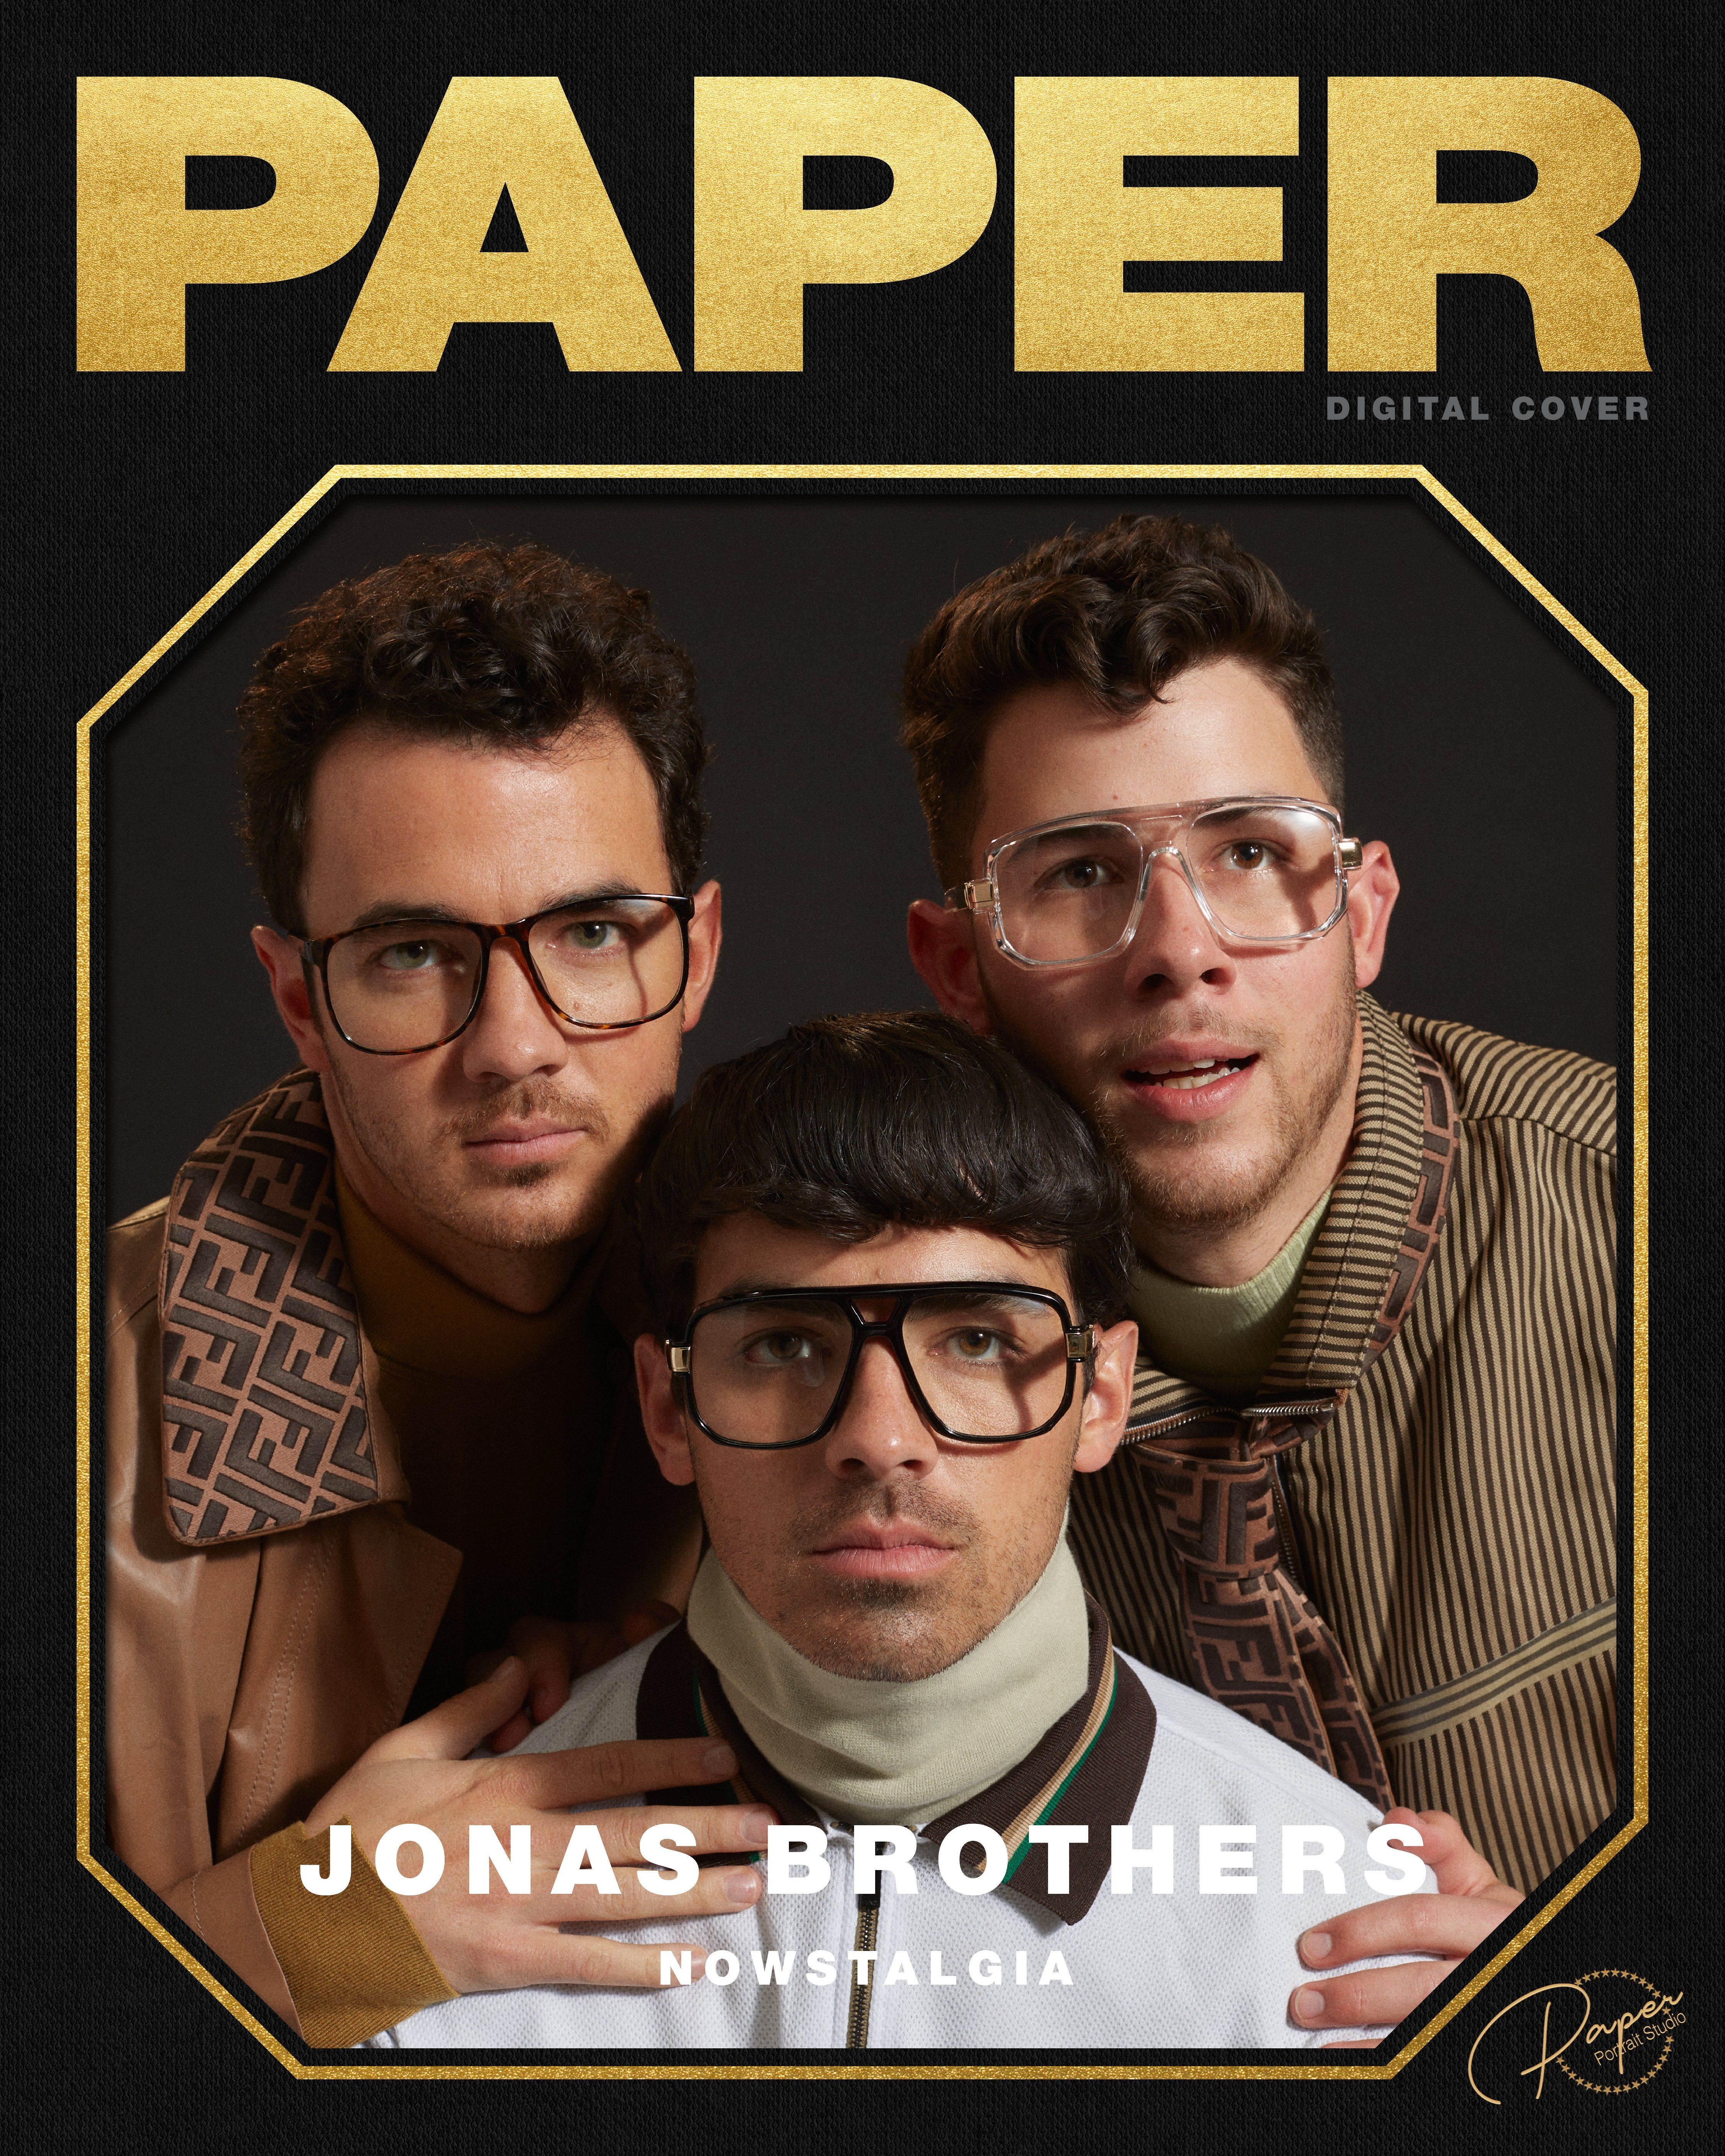 Jonas Brothers on the Cover of PAPER Magazine - PAPER Magazine